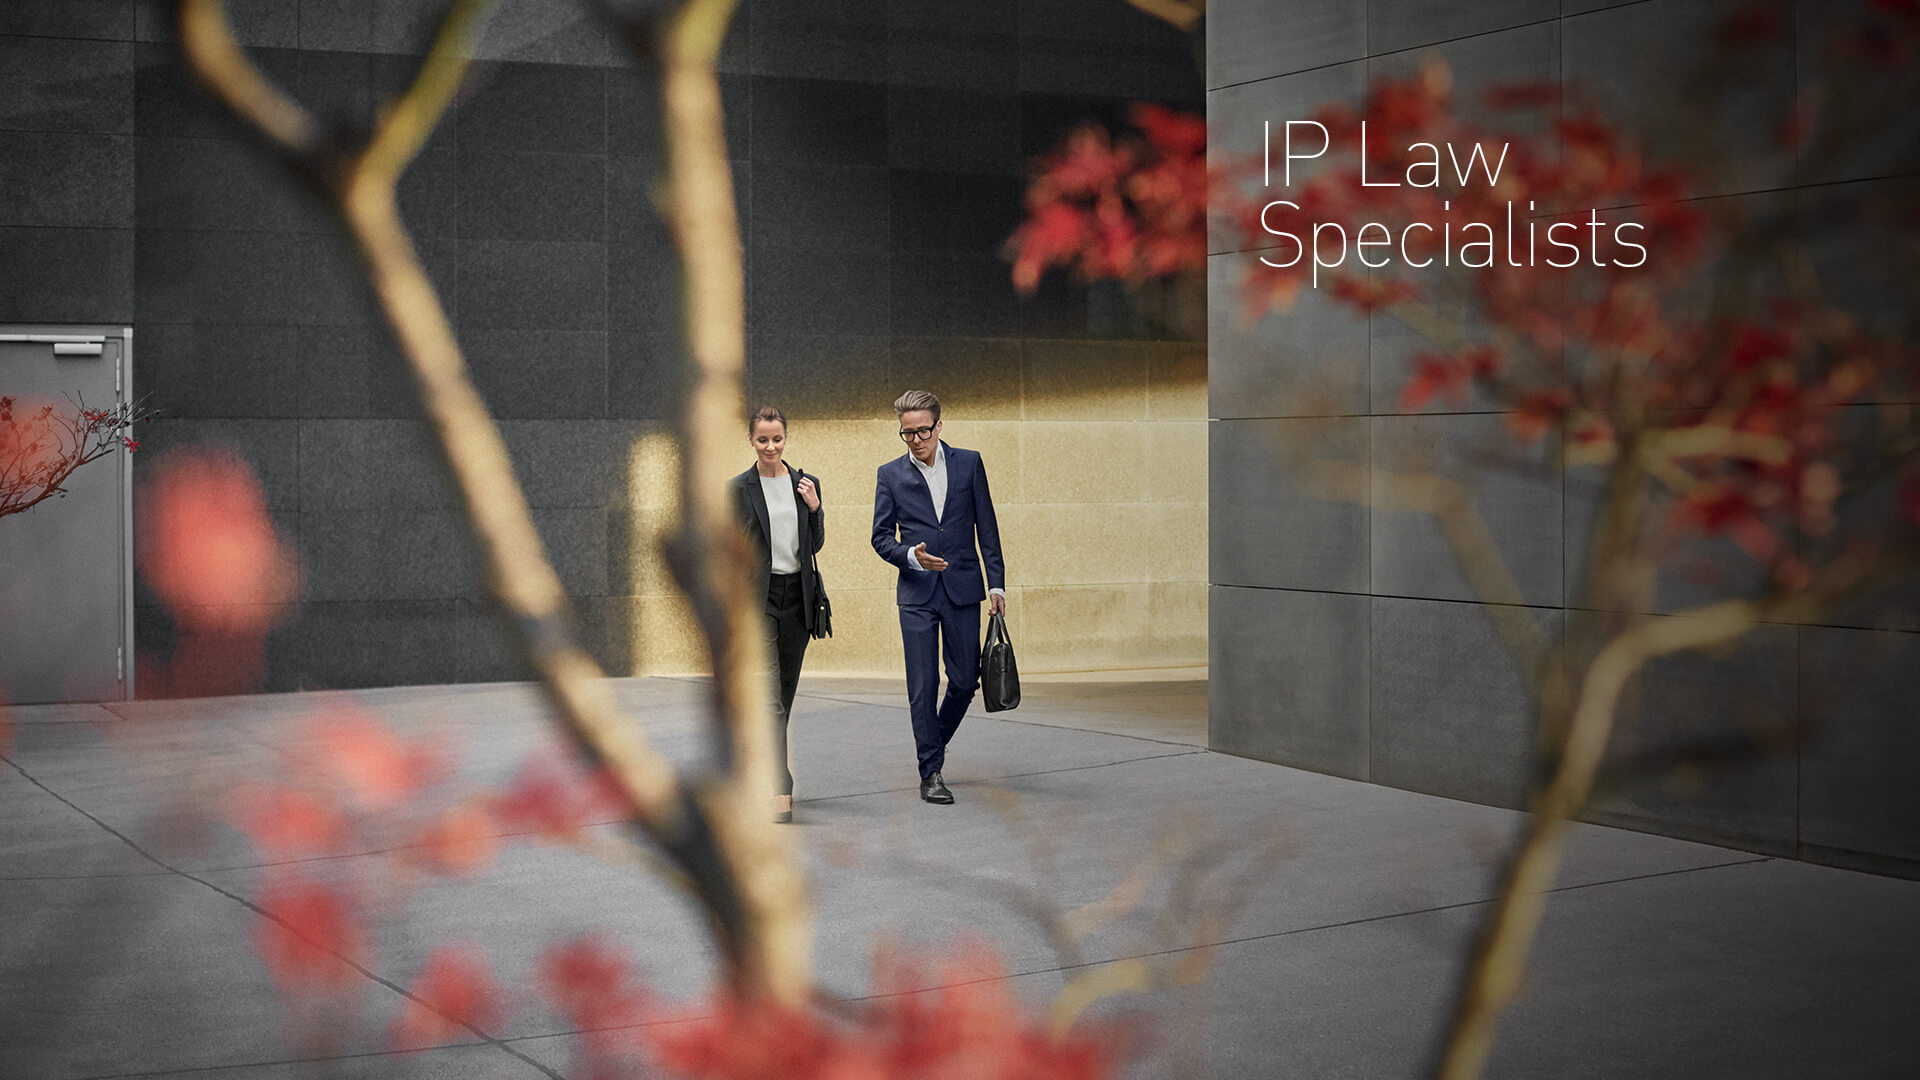 IP Law specialists